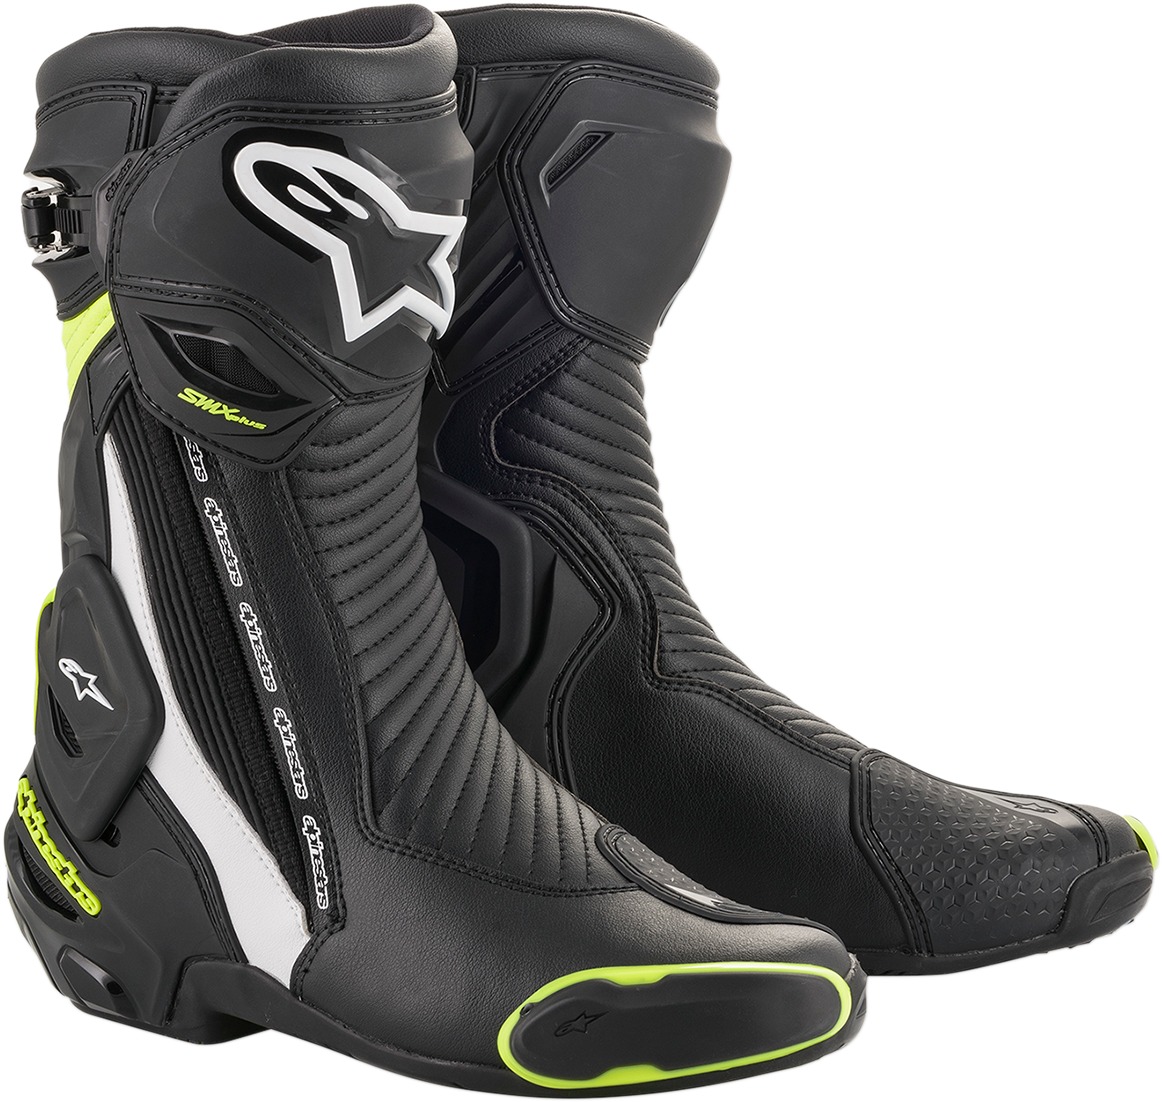 SMX Plus Street Riding Boots Black/White/Yellow US 5 - Click Image to Close